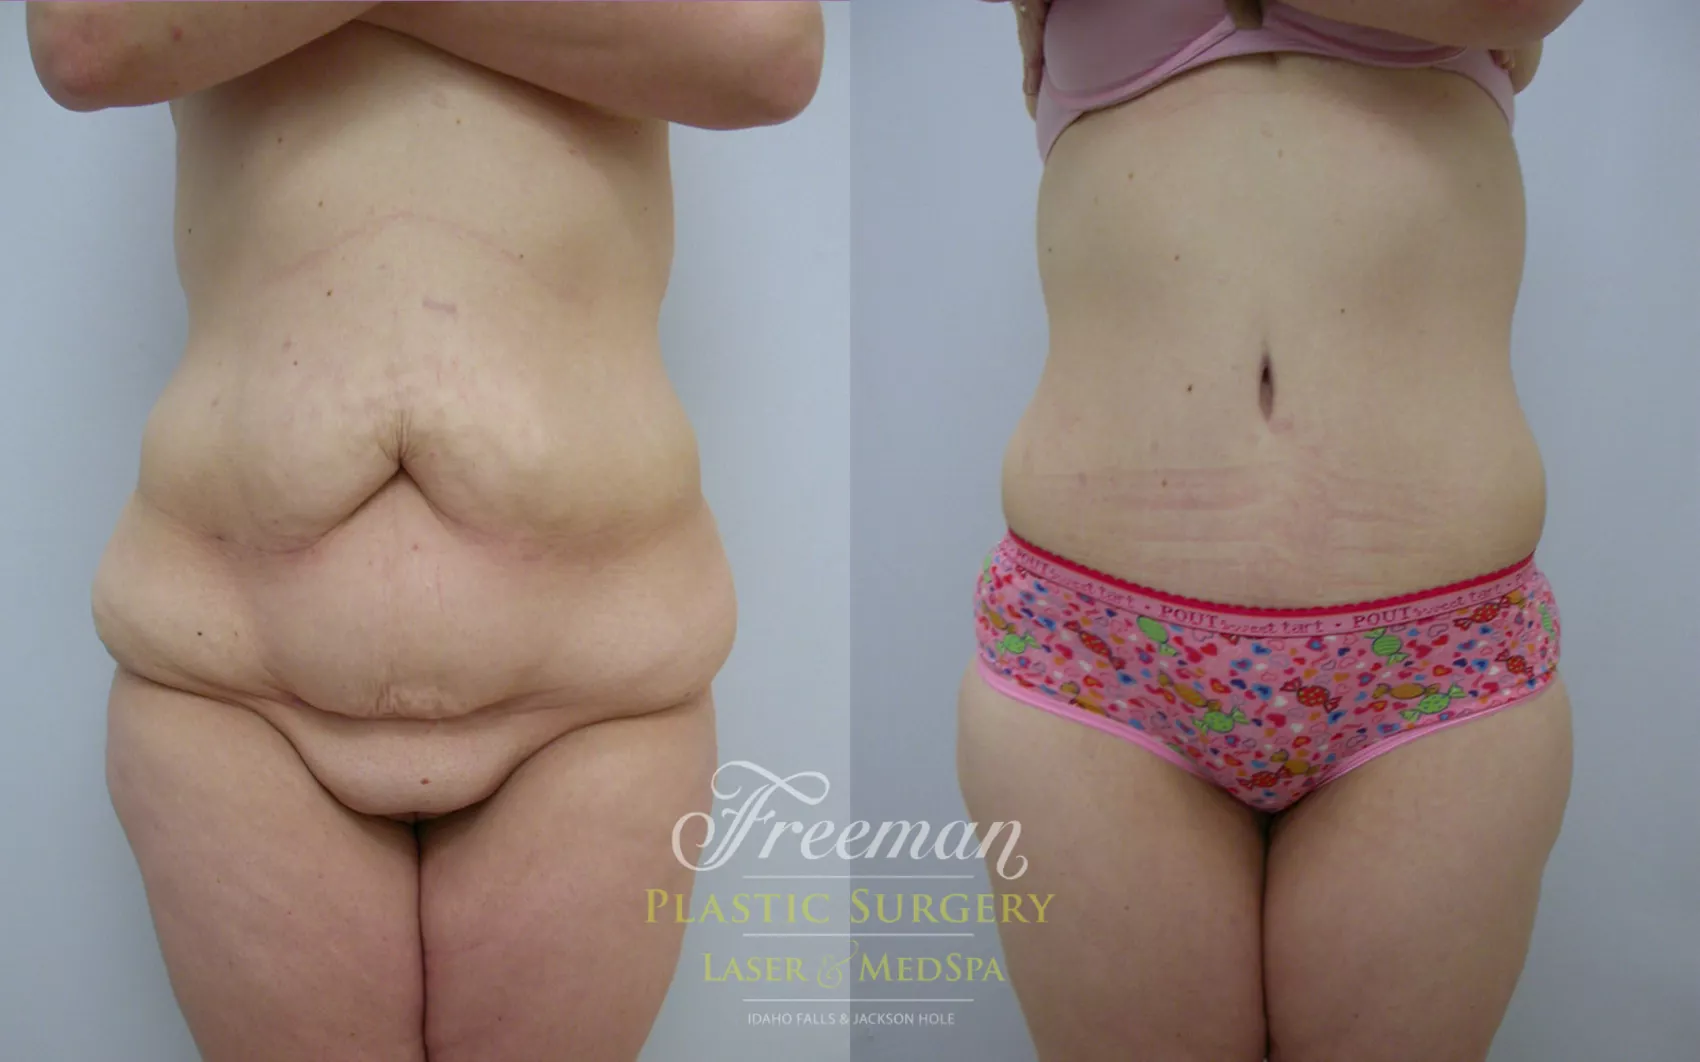 https://images.drmarkfreeman.com/content/images/tummy-tuck-16-view-1-detail.webp